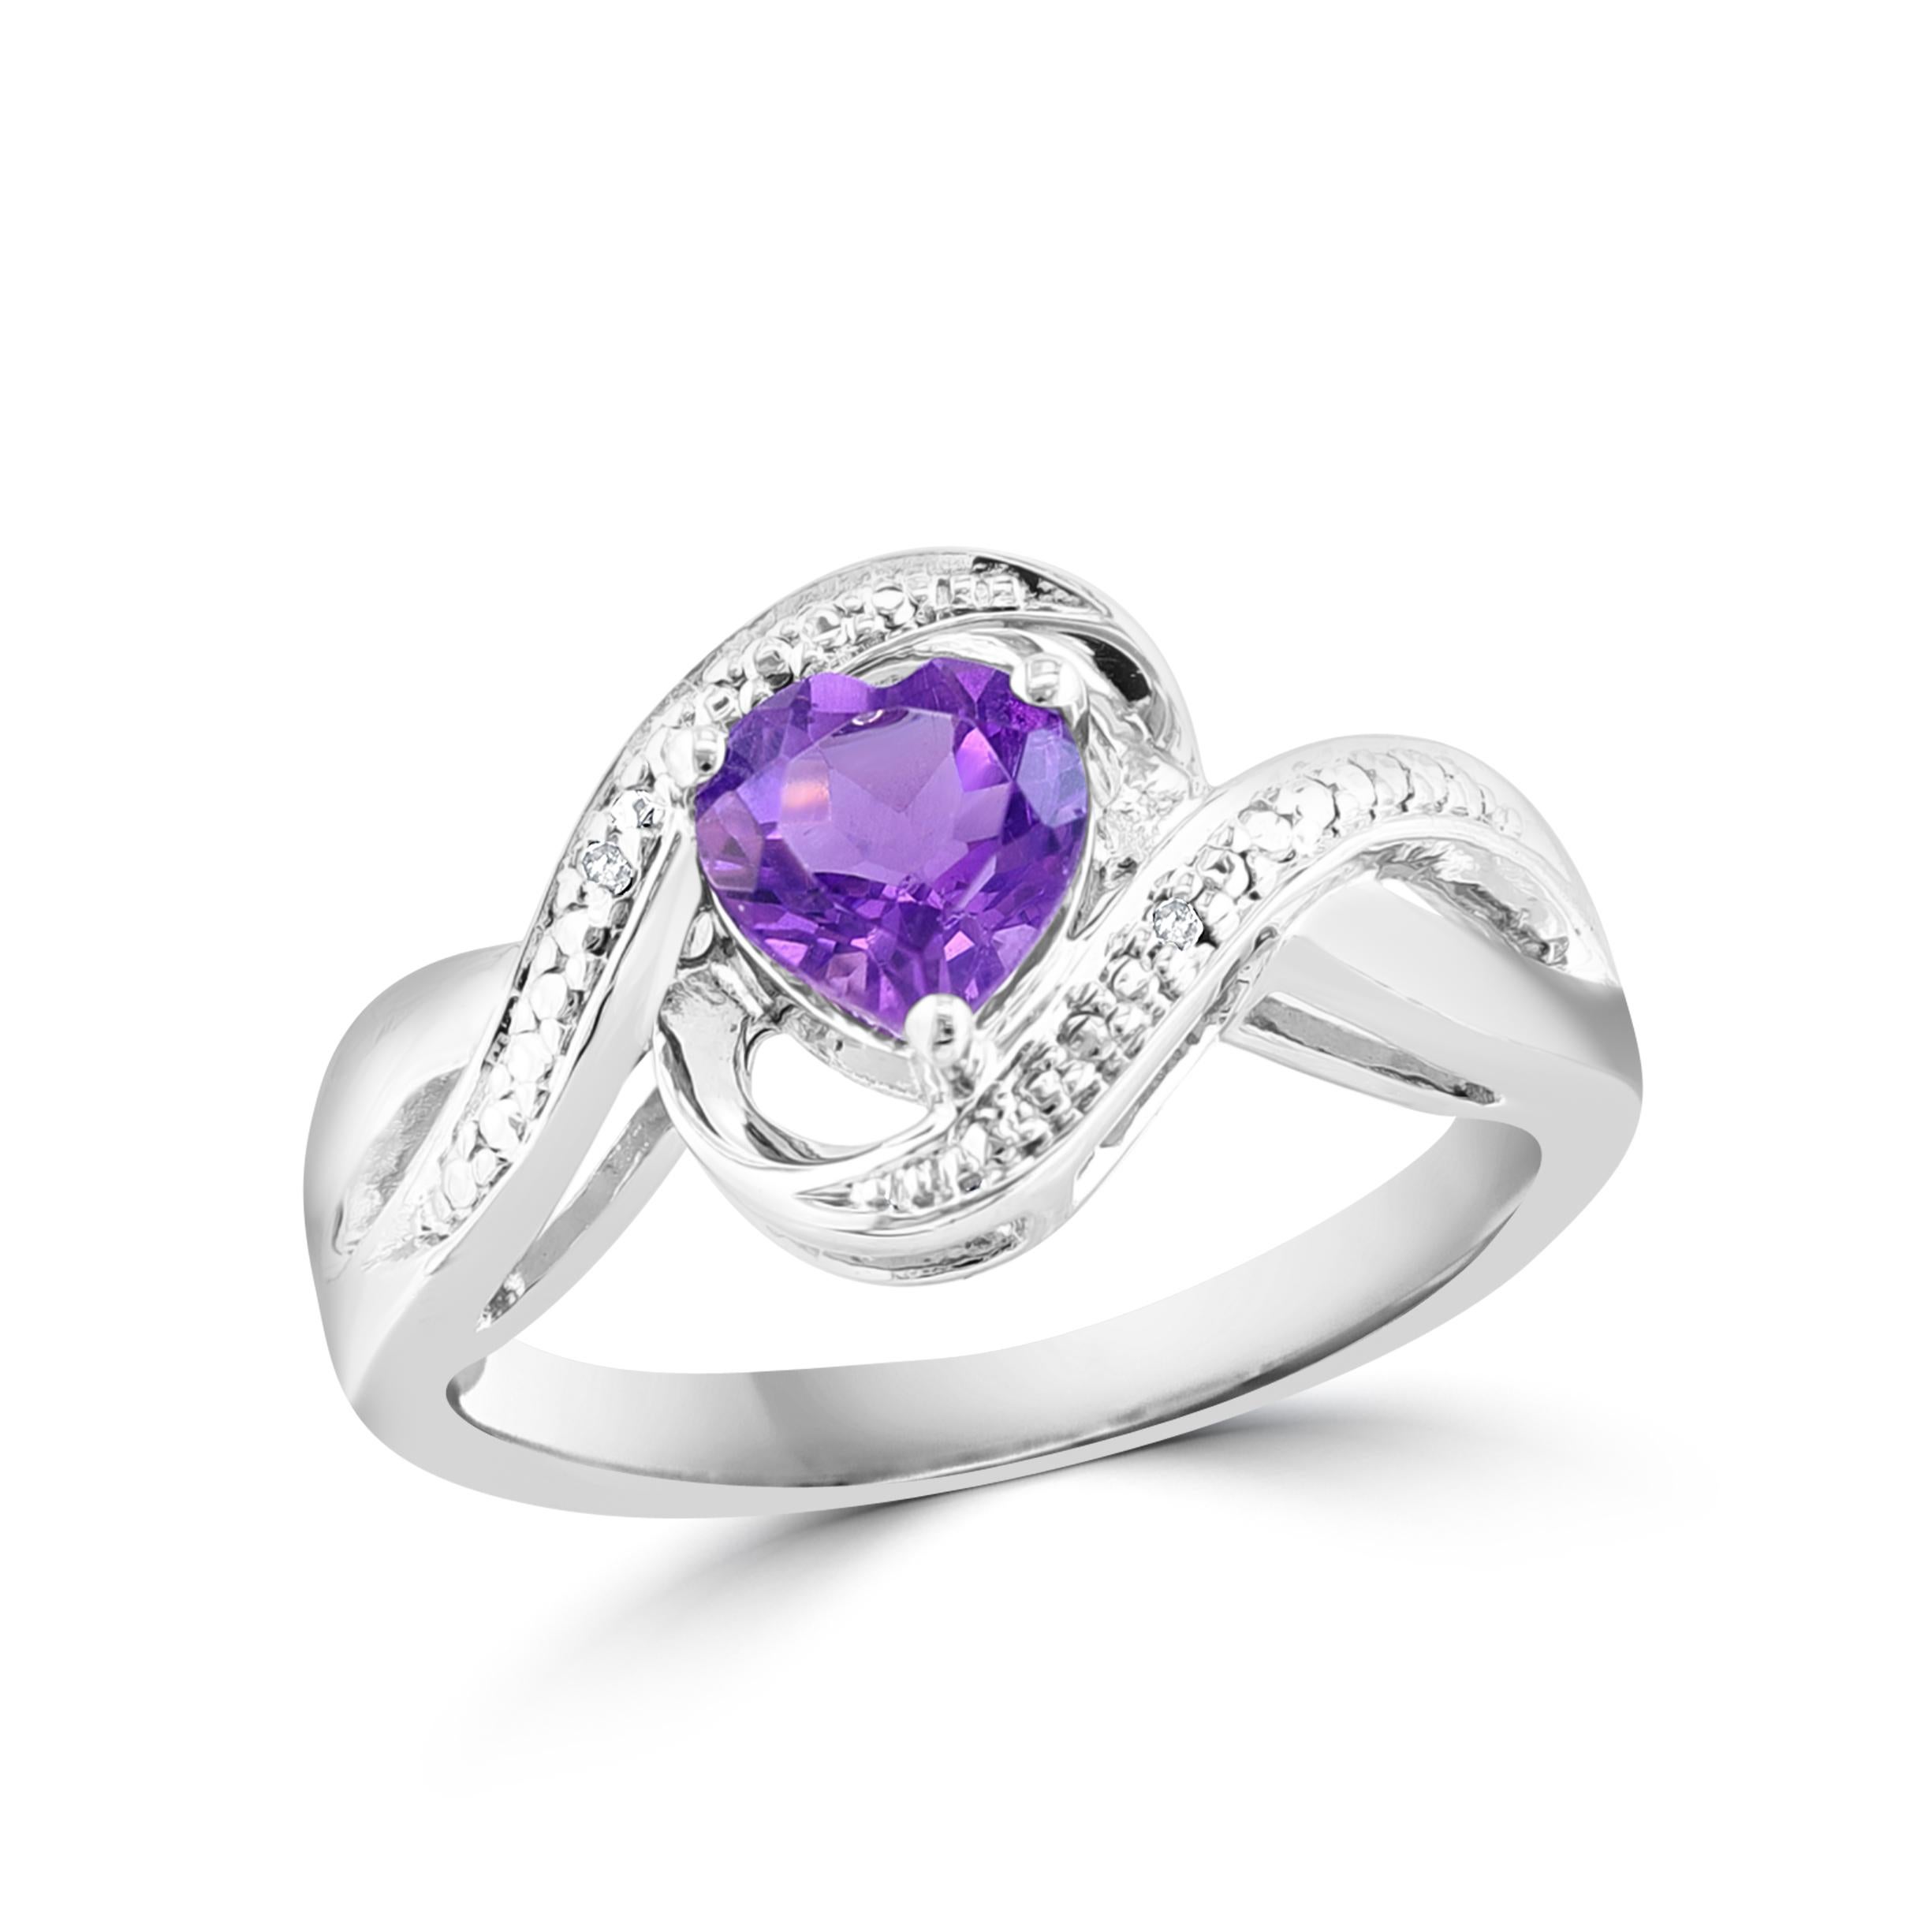 Sterling Silver & Natural Amethyst Suite Ring , Earring & Pendant with Chain
Beautiful full suite of Heart shape Amethyst and Zirconium
Sterling Silver and Natural Amethyst Suite Ring , Earring & Pendant with Chain
Sterling Silver weight 7.5 gm